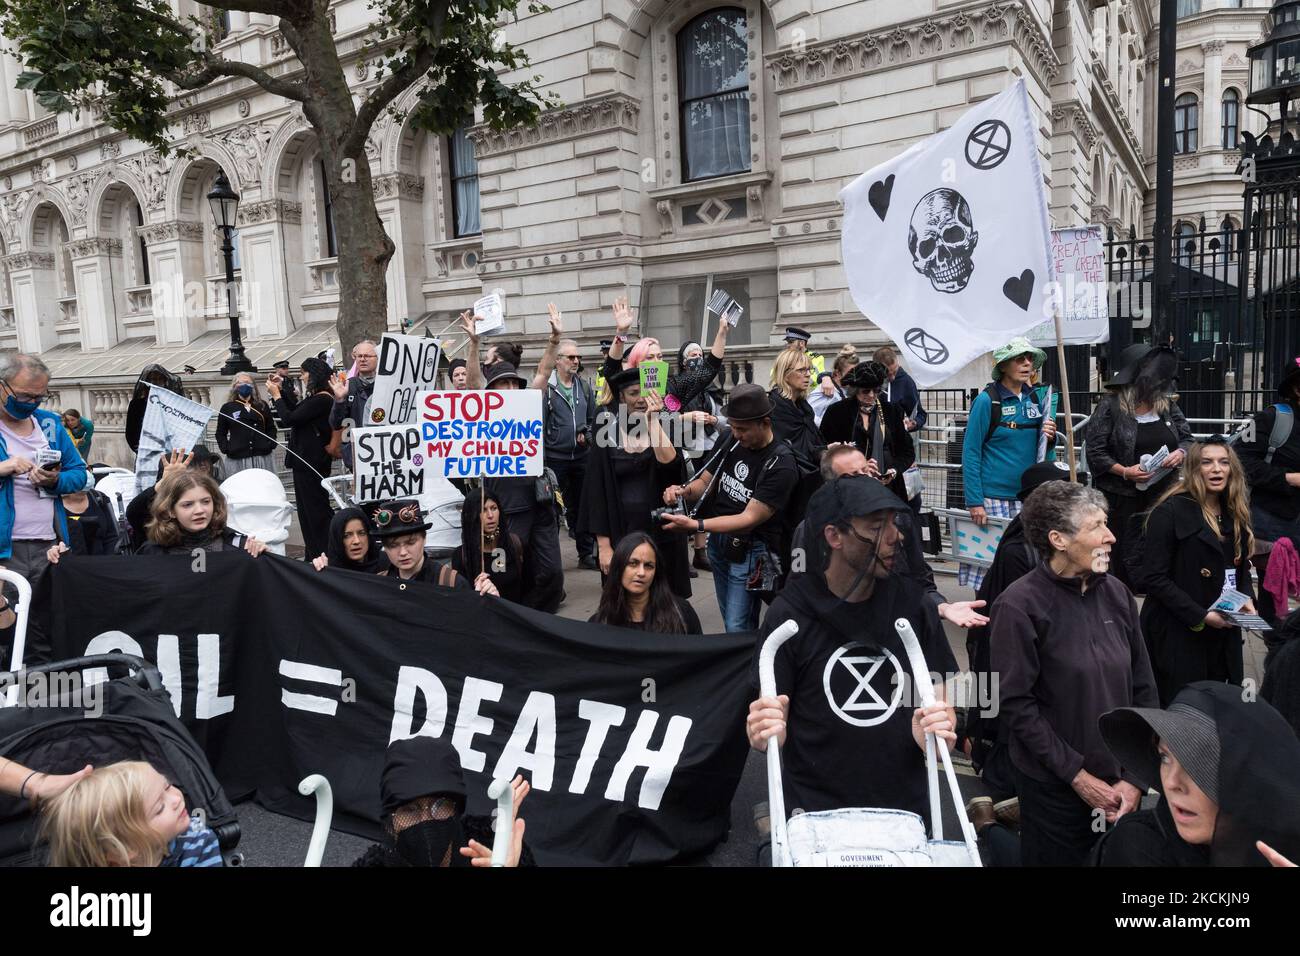 LONDON, UNITED KINGDOM - AUGUST 31, 2021: Activists from Extinction Rebellion block the entrance to Downing Street during a funeral march demanding an immediate stop to all fossil fuel investment by the British government amid climate crisis and ecological emergency on 31 August 2021 in London, England. The action is a part of the 'Impossible Rebellion', a new wave of protests and civil disobedience actions targeting government and financial institutions. (Photo by WIktor Szymanowicz/NurPhoto) Stock Photo